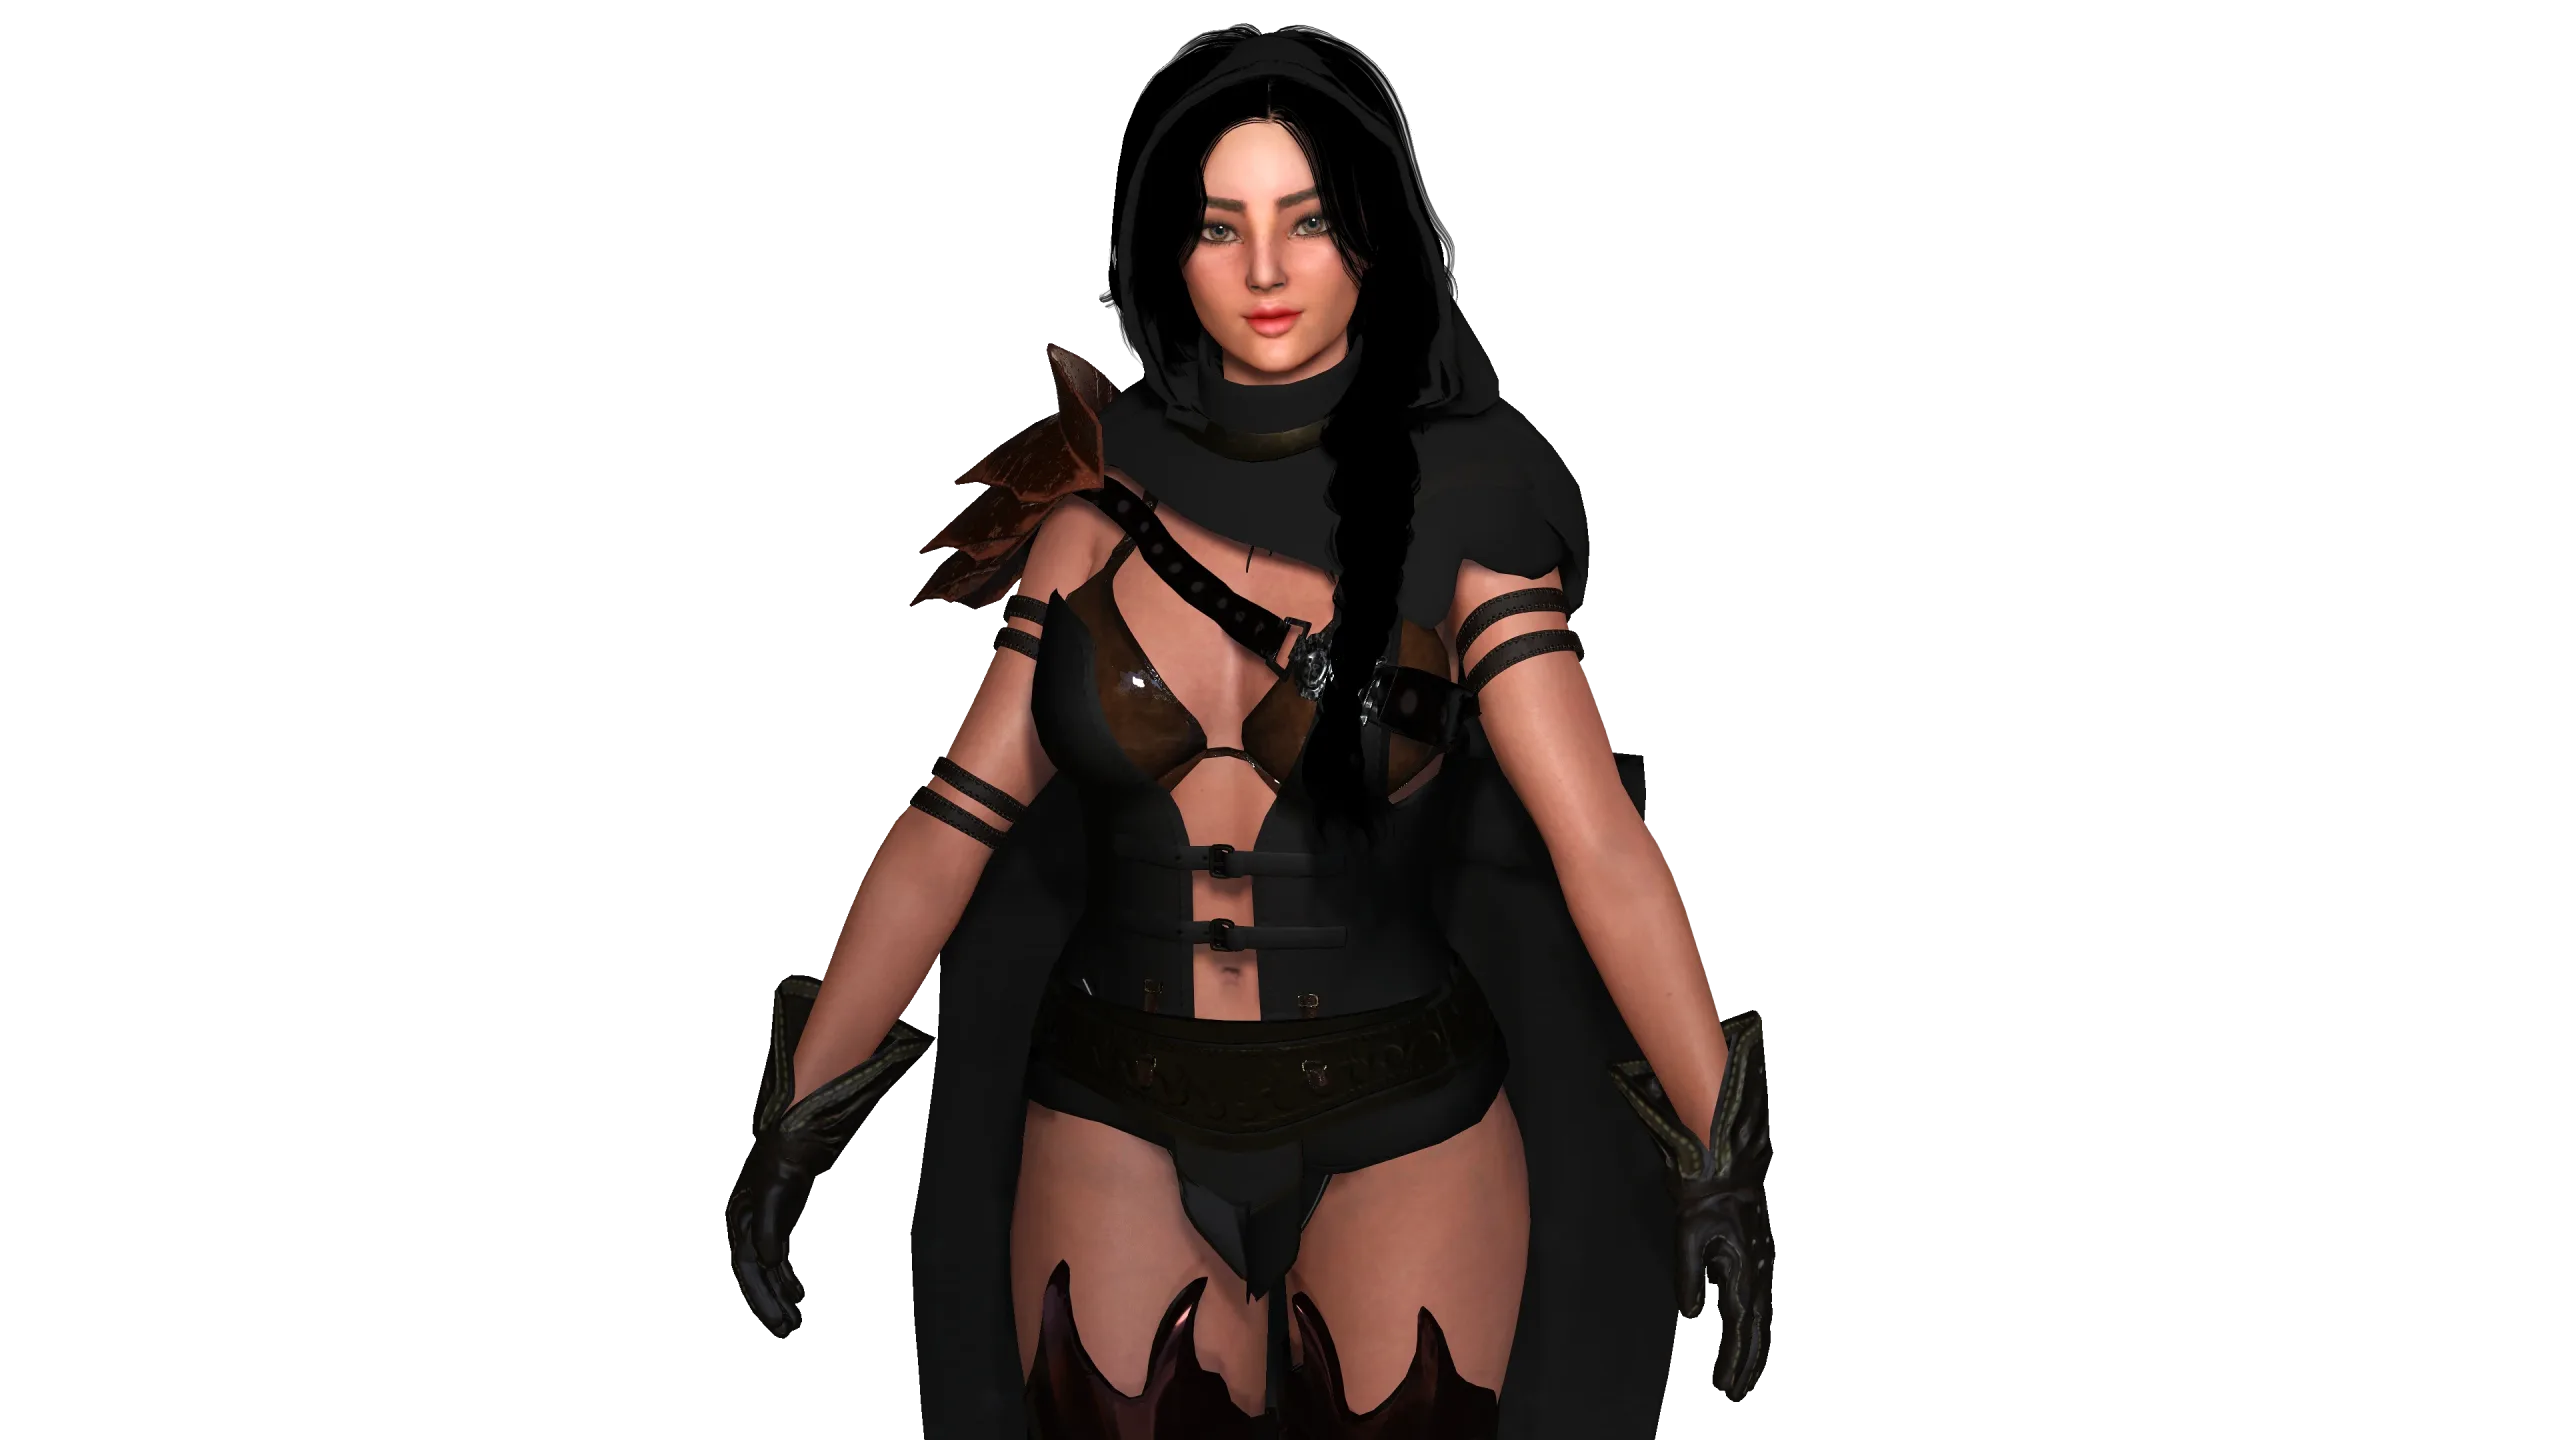 AAA 3D FANTASY FEMALE WARRIOR - REALISTIC RIG GAME CHARACTER